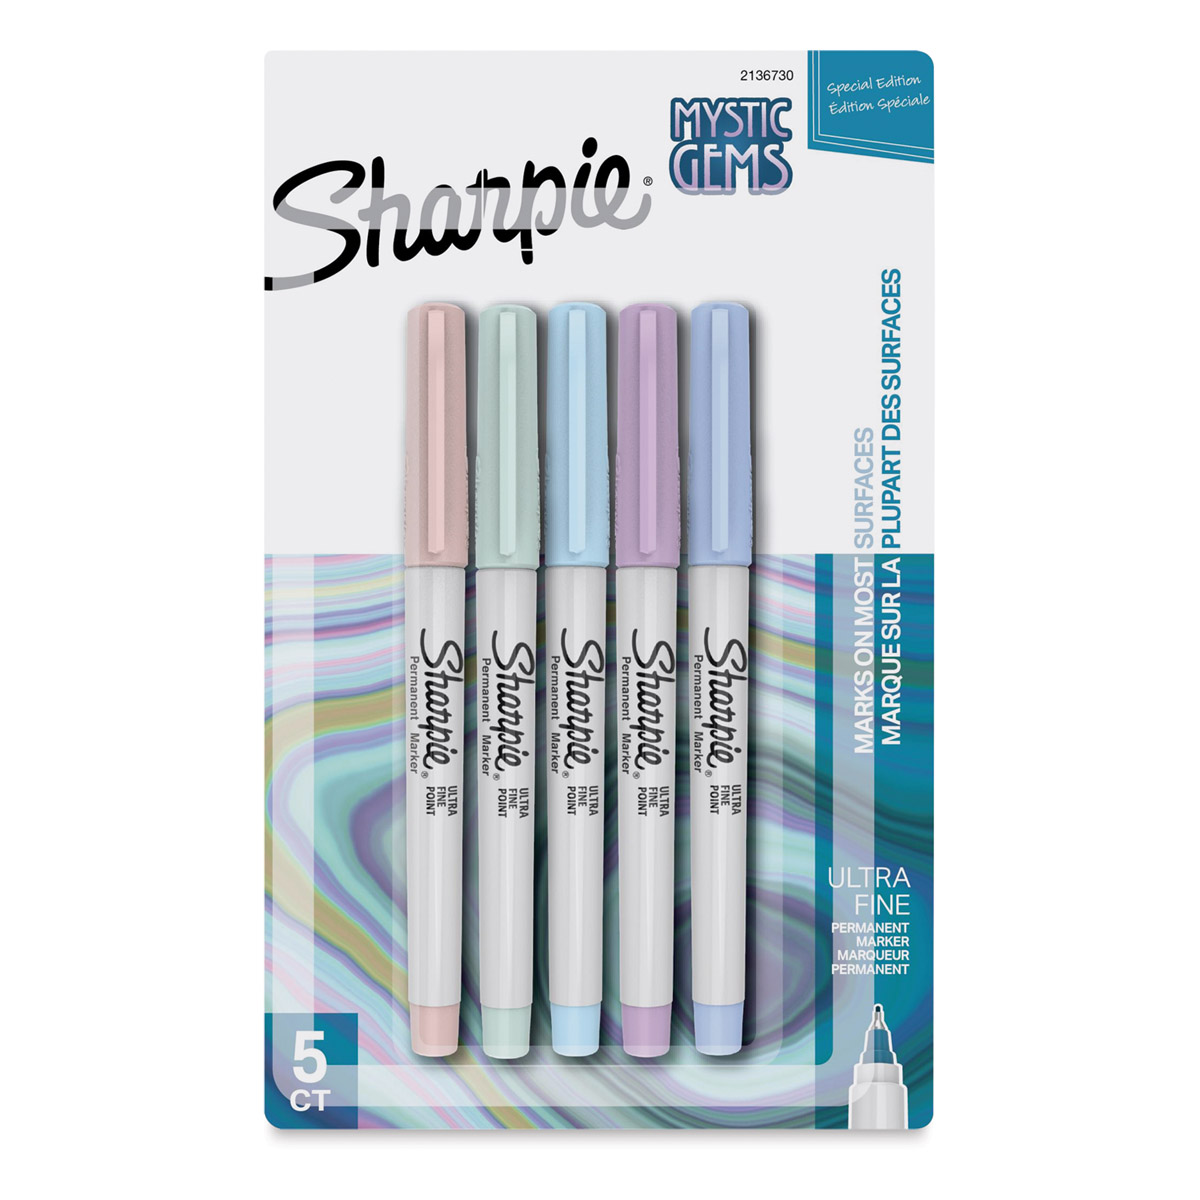 Sharpie Ultra-Fine Point Markers - Glam Pop Colors, Set of 24